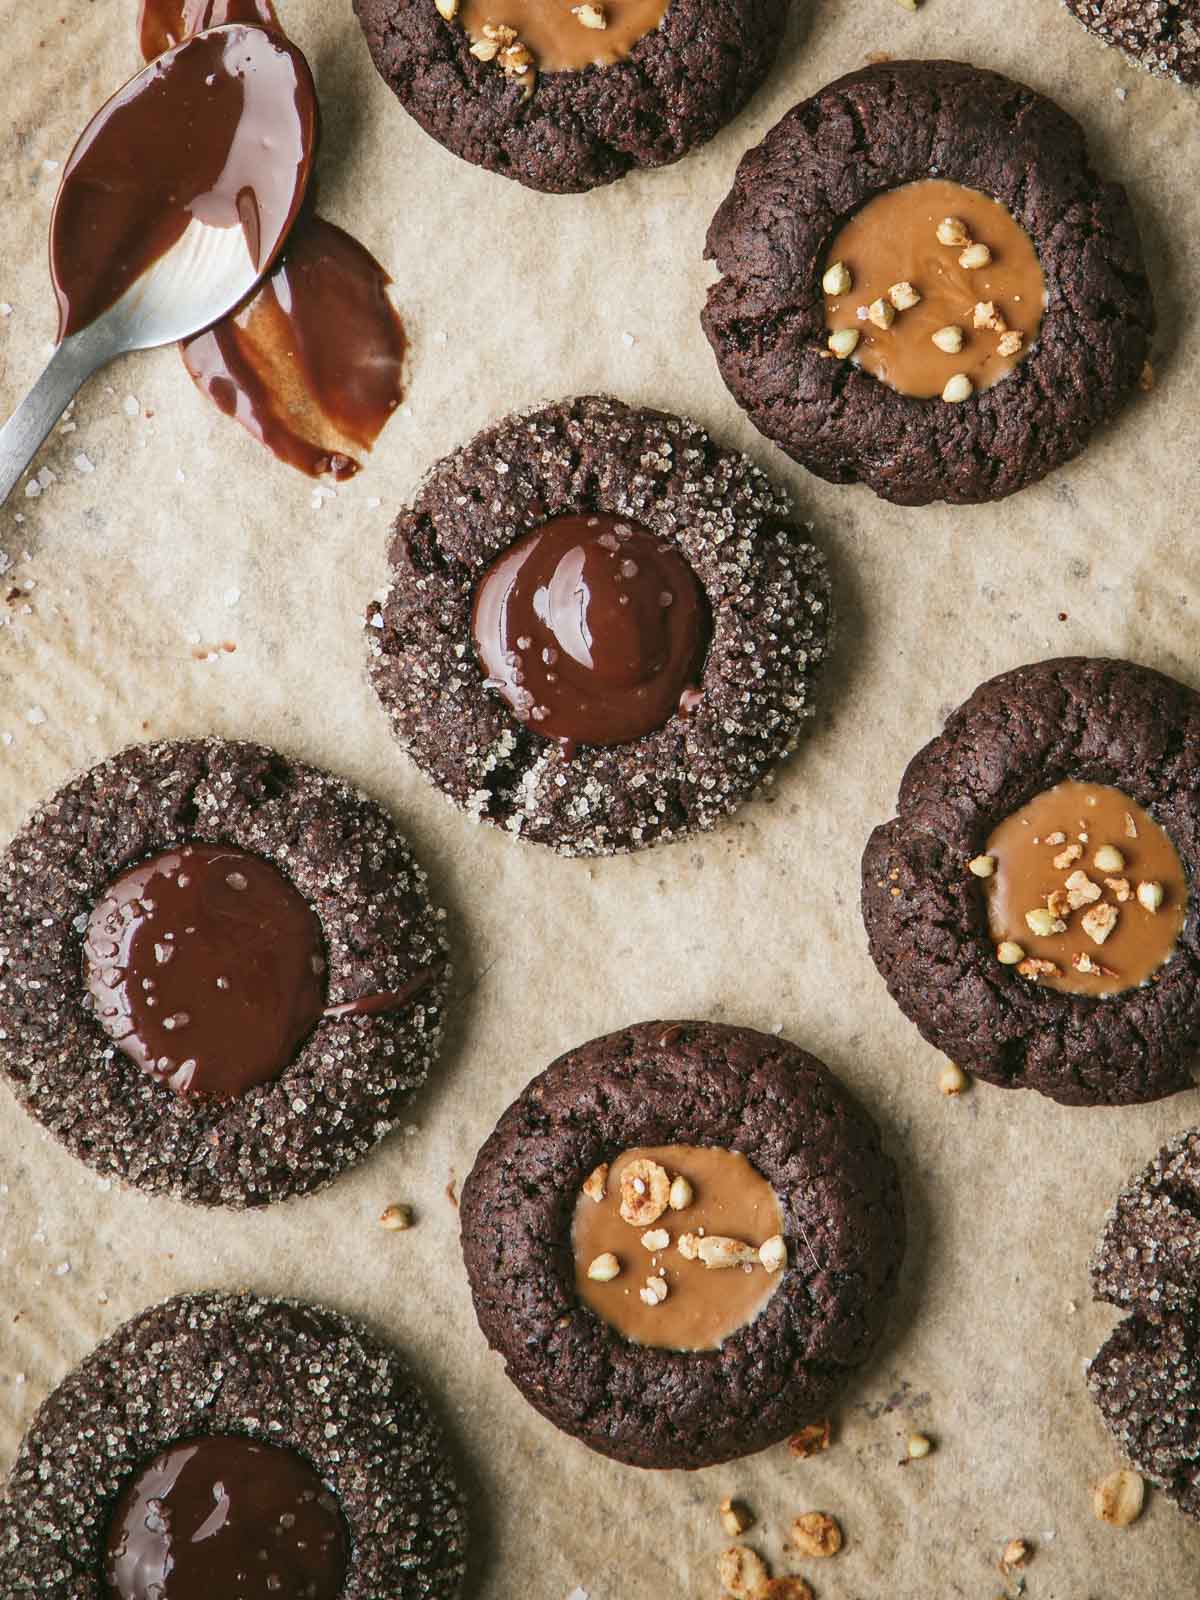 Chocolate cookies filled with melted chocolate.